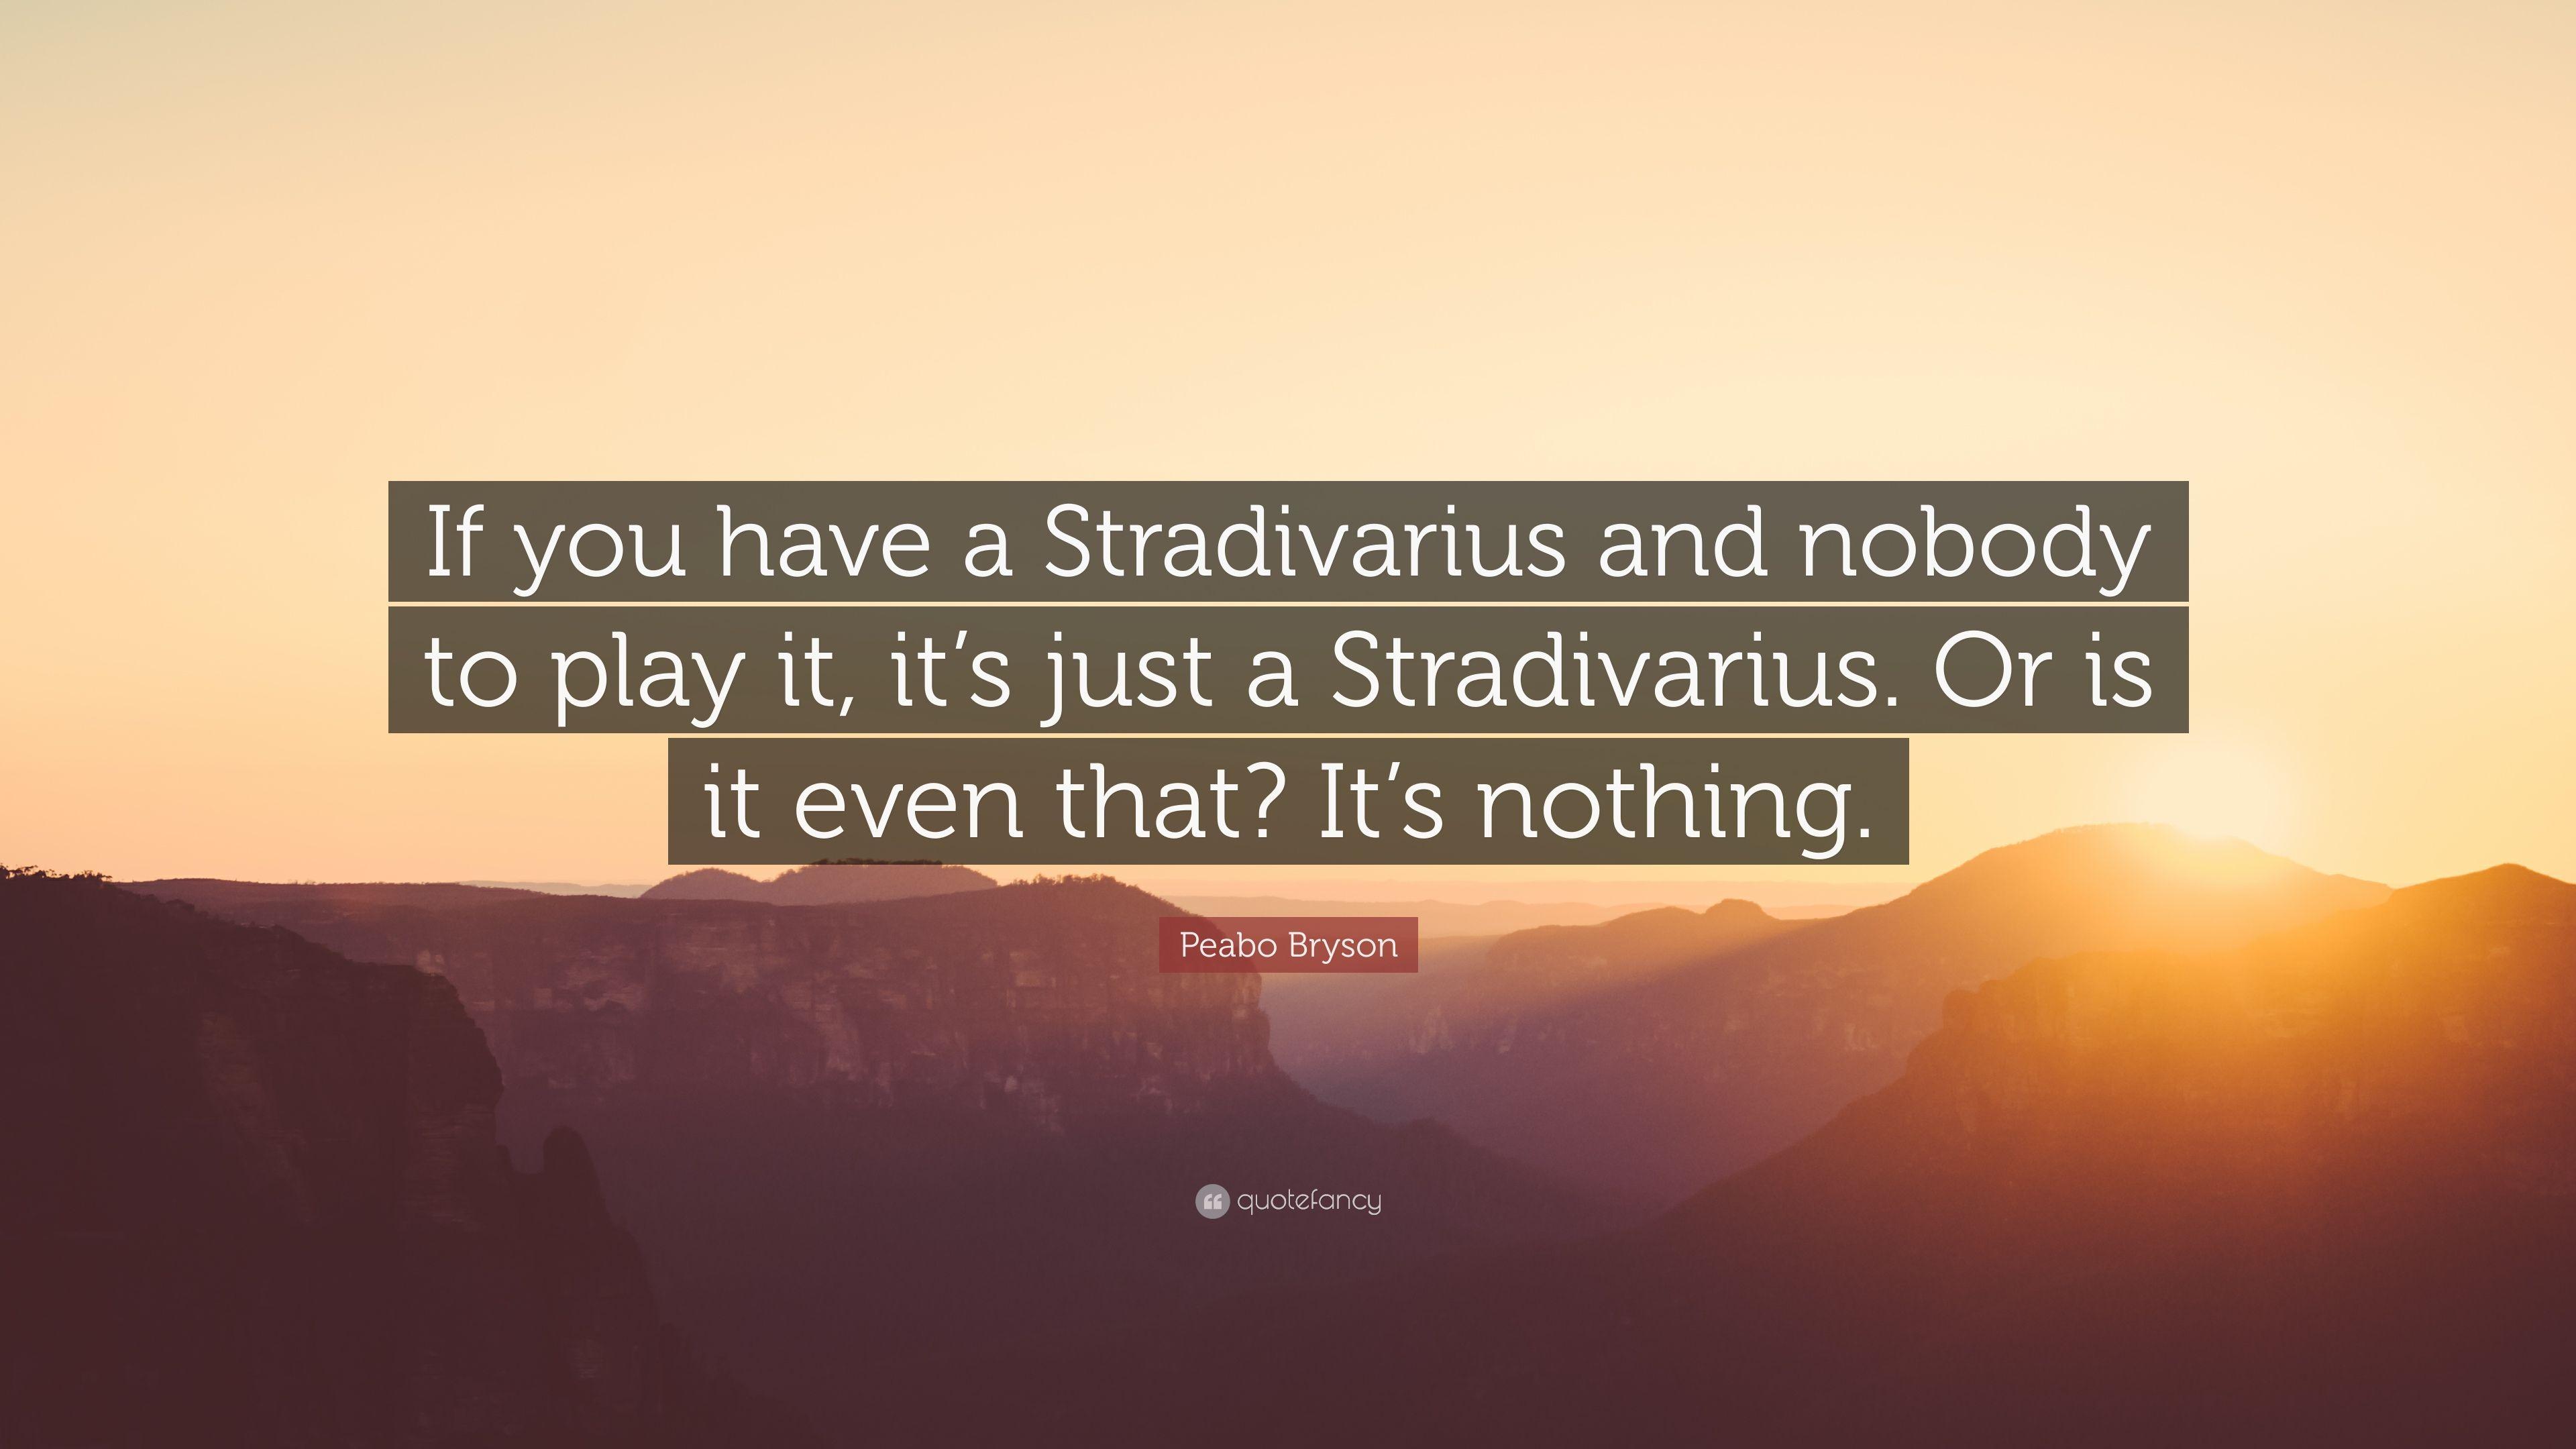 Peabo Bryson Quote: “If you have a Stradivarius and nobody to play